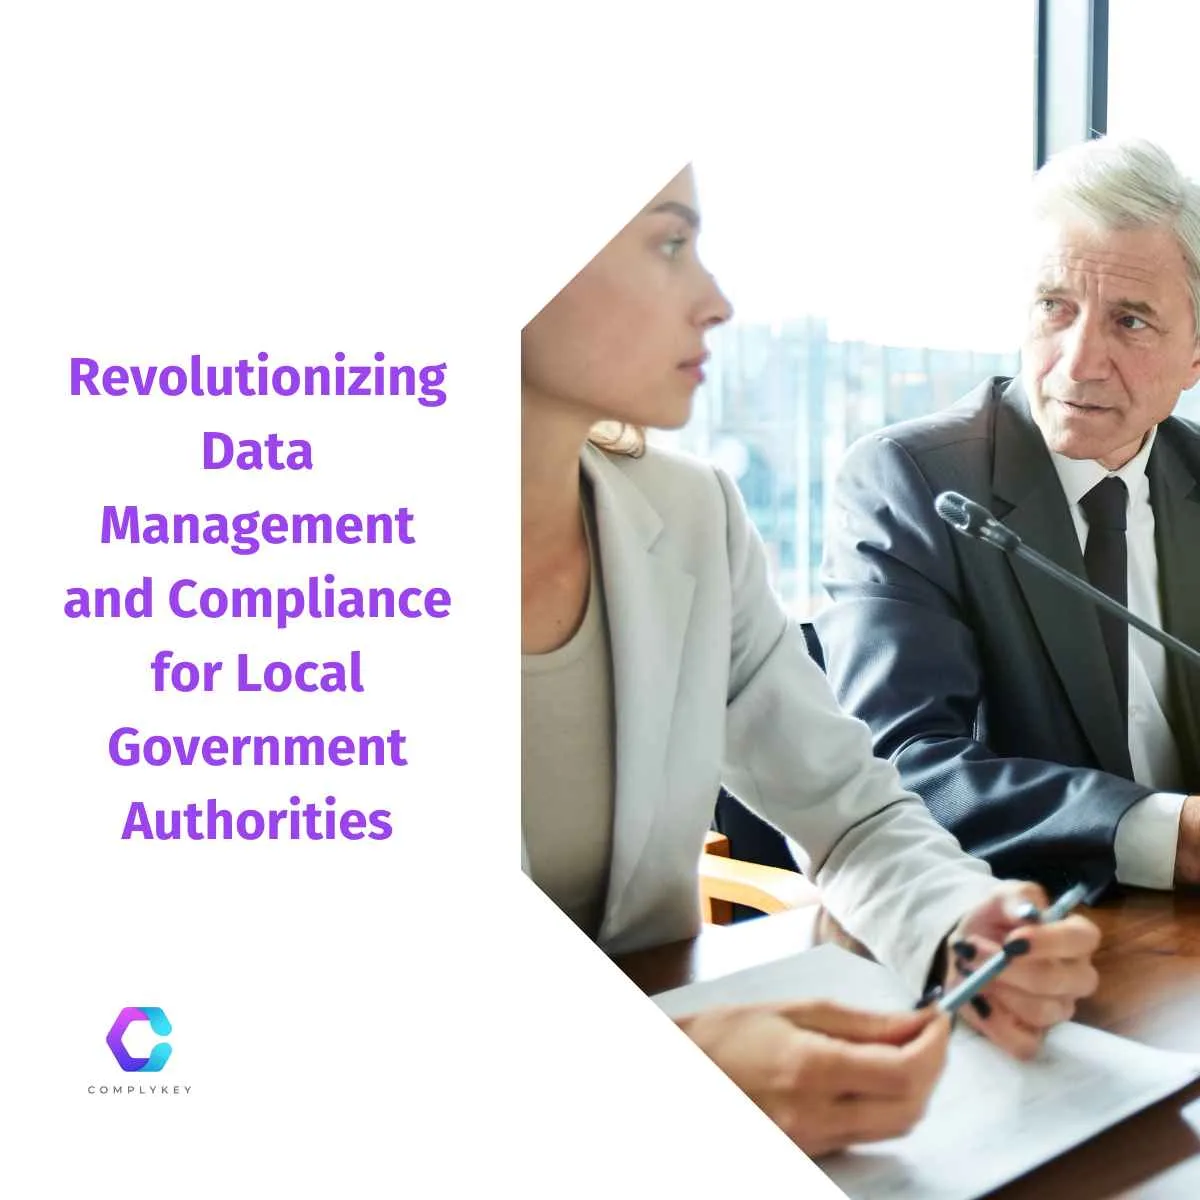 Revolutionizing Data Management and Compliance for Local Government Authorities